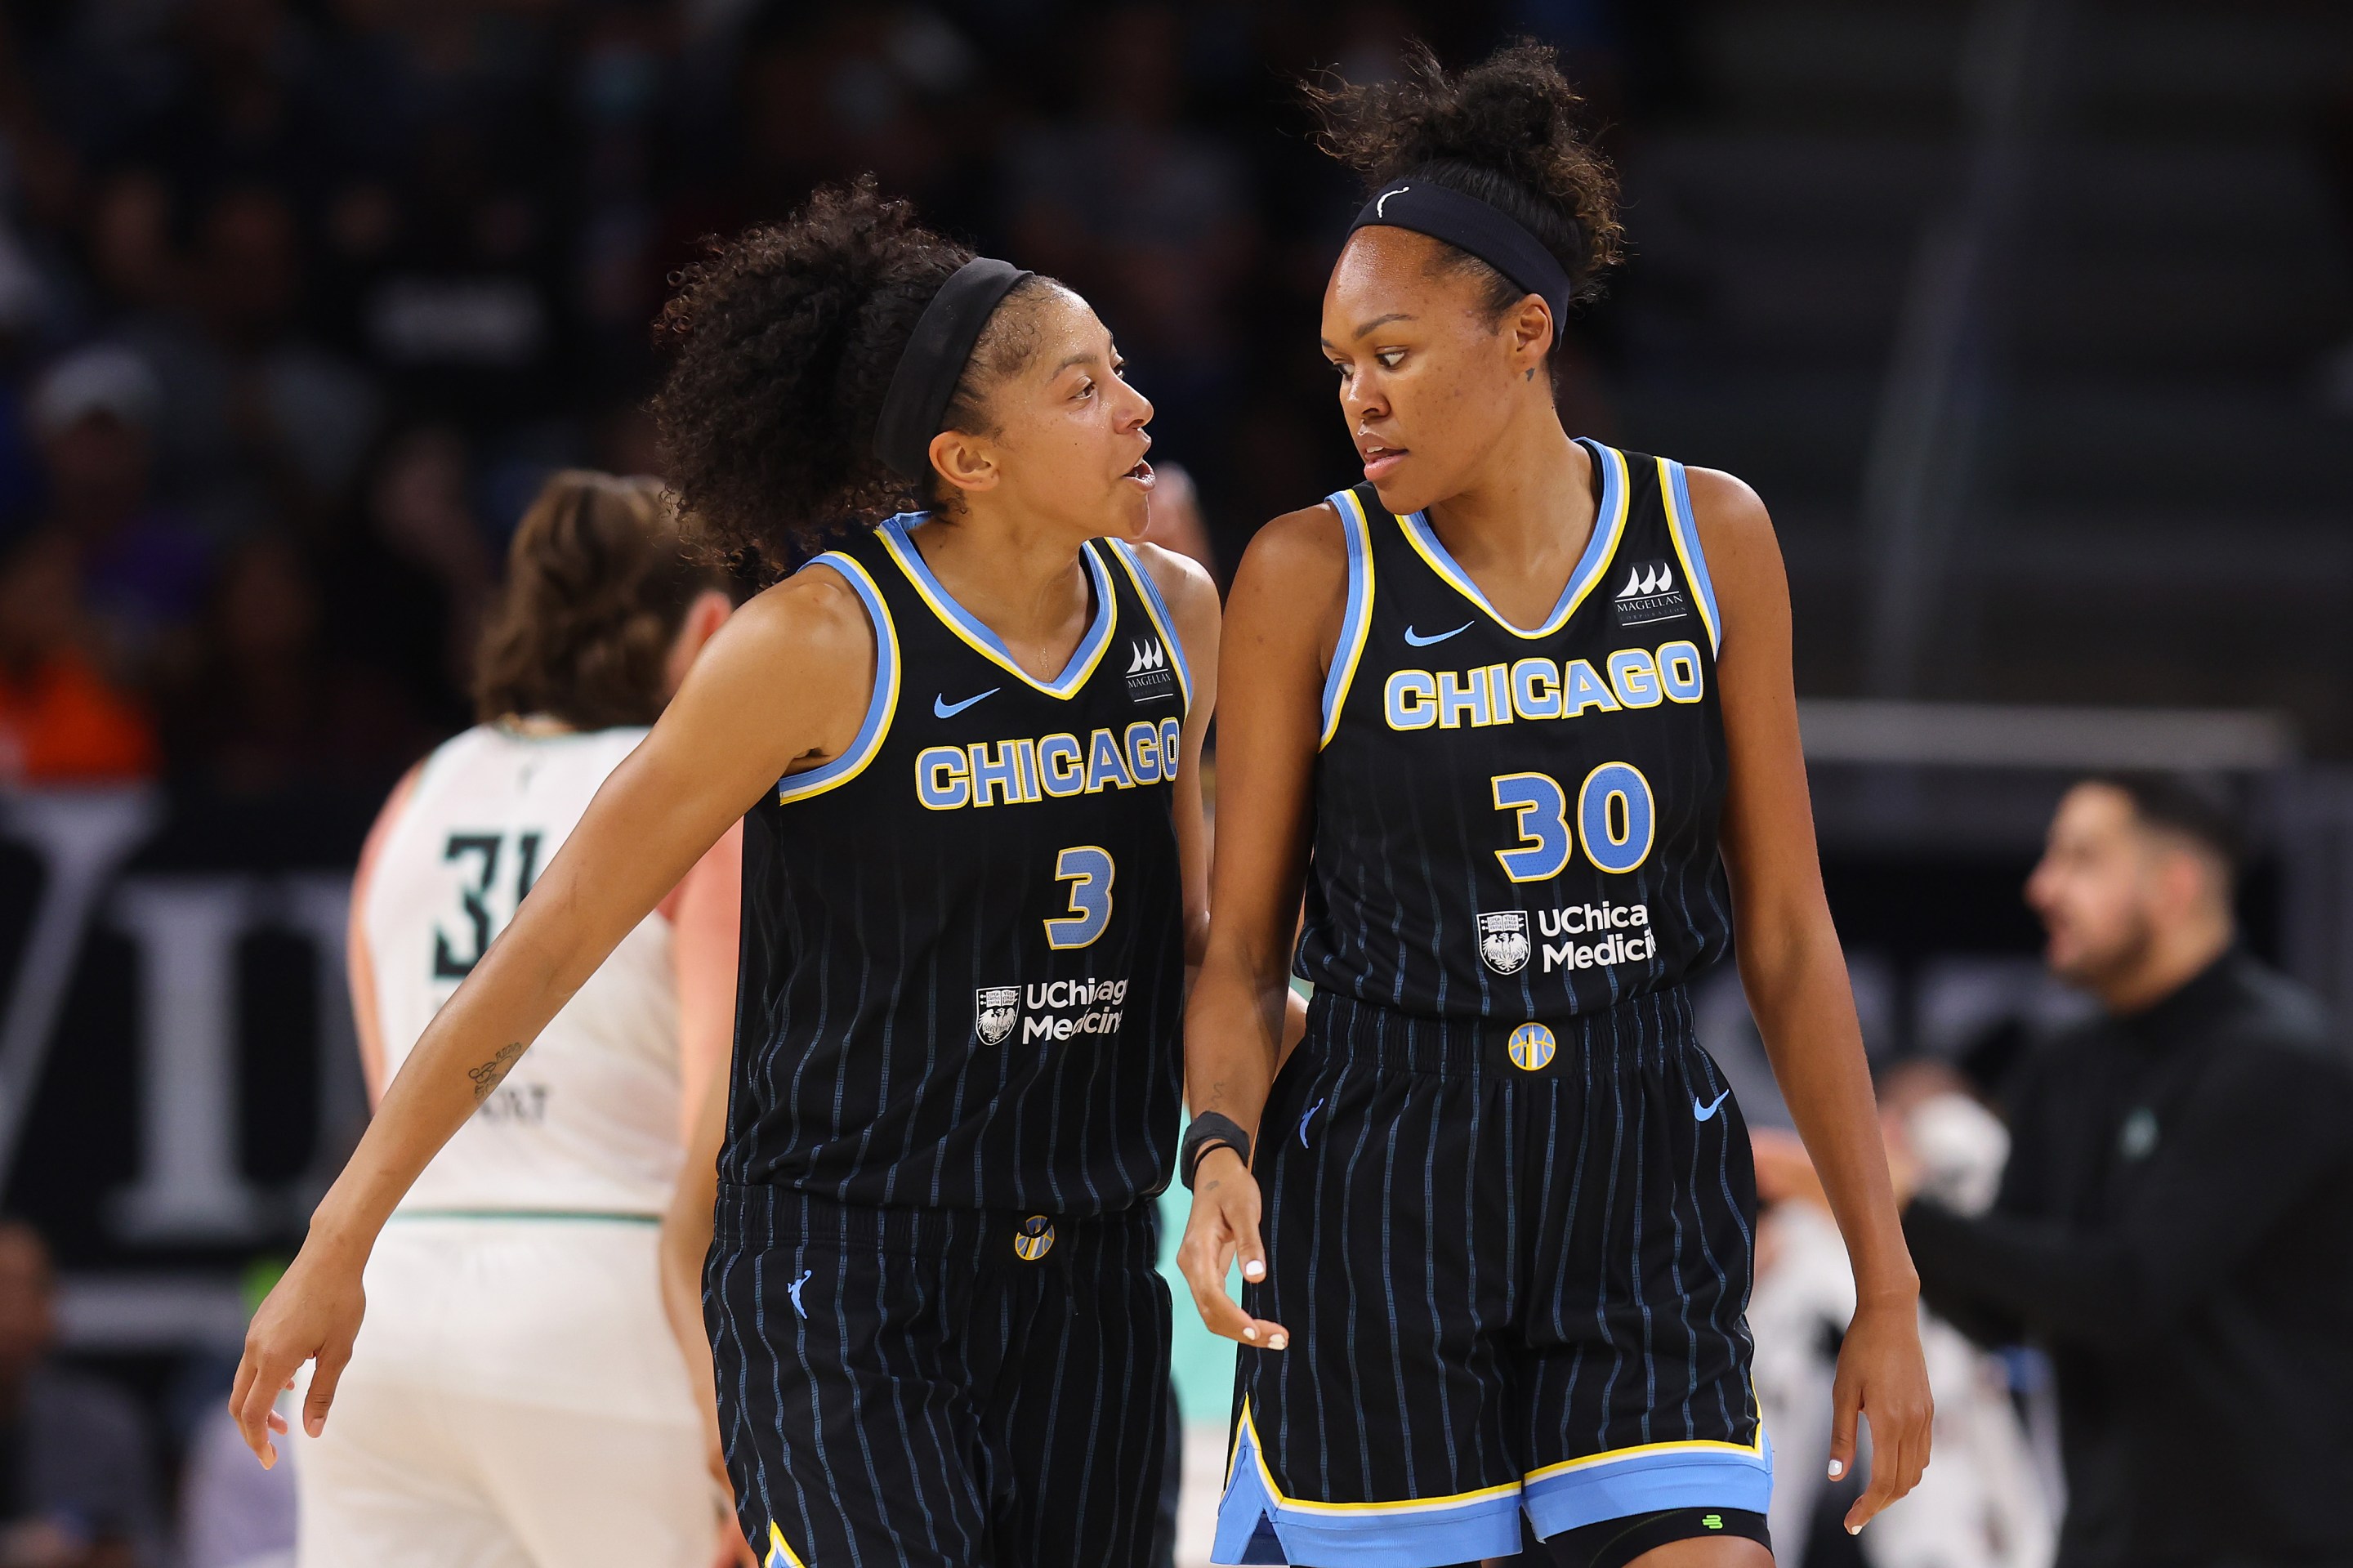 CHICAGO, ILLINOIS - AUGUST 17: Candace Parker #3 and Azura Stevens #30 of the Chicago Sky talk against the New York Liberty in Game One of the First Round of the 2022 WNBA Playoffs at Wintrust Arena on August 17, 2022 in Chicago, Illinois.